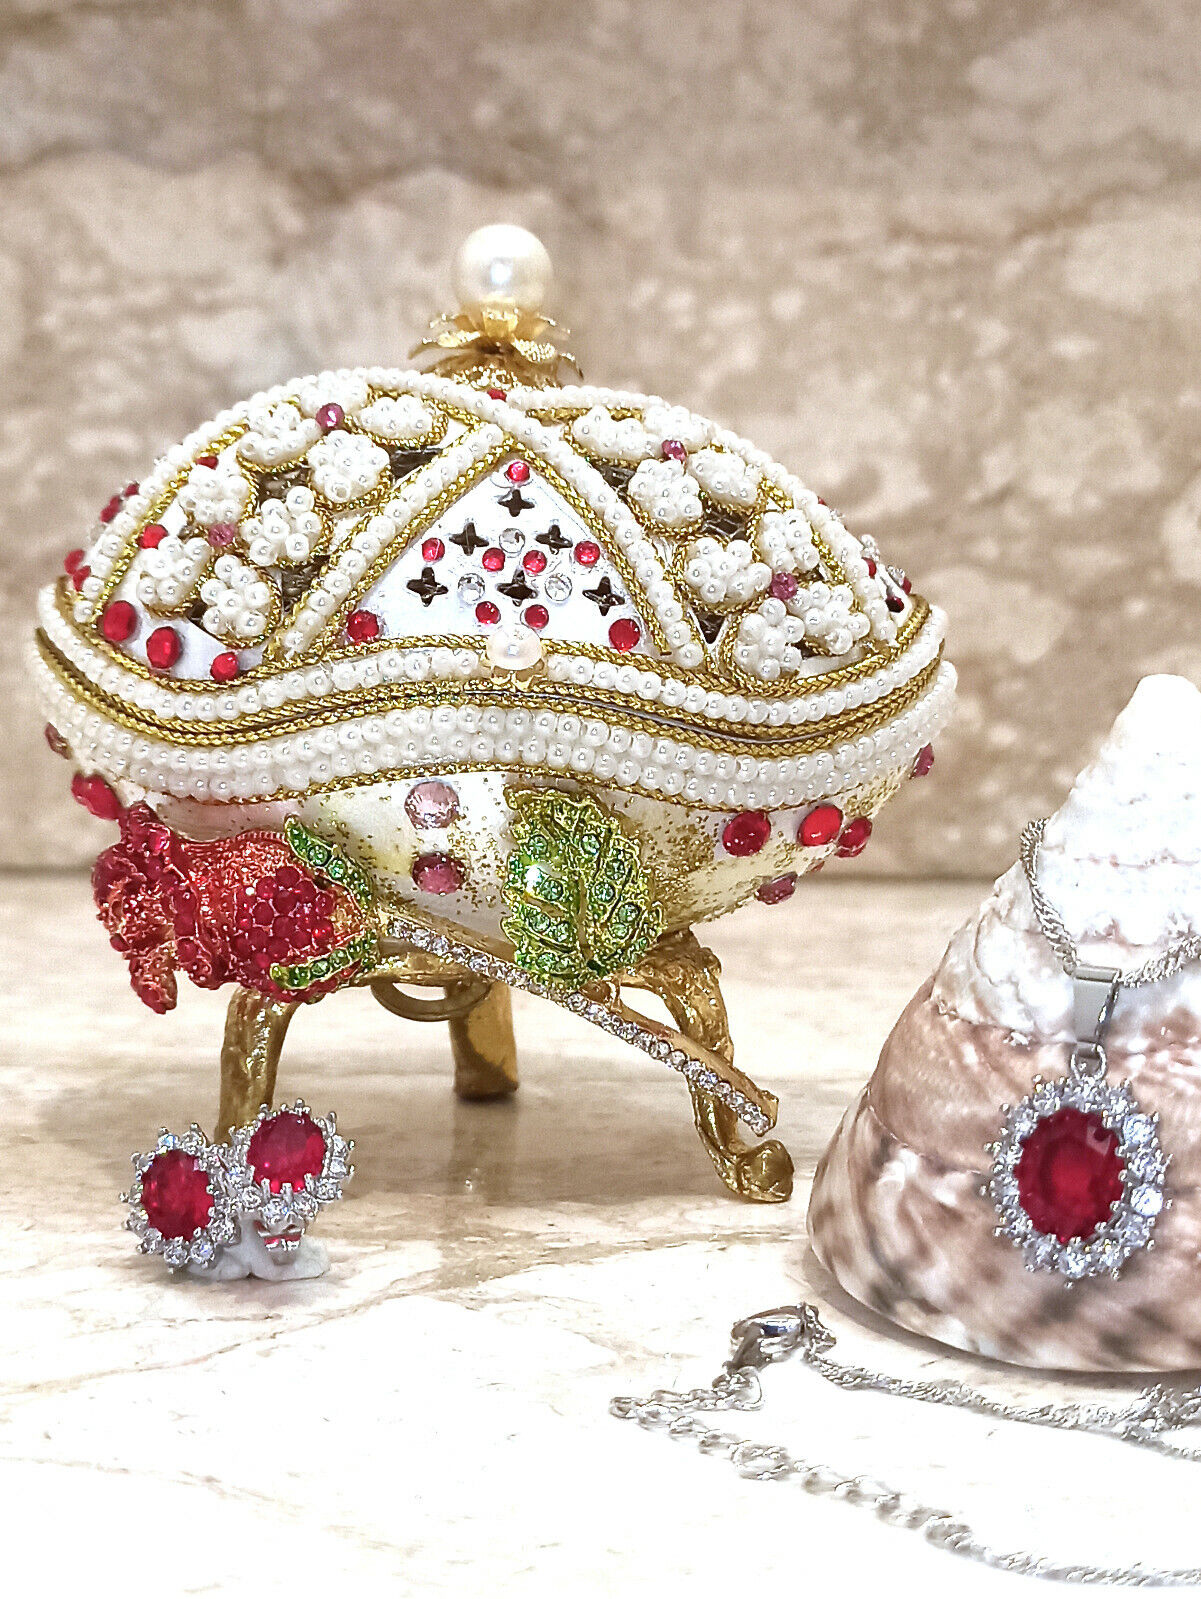 Luxury Christmas gifts for mom Faberge egg Ornament Home decor & Ruby Jewelry HM